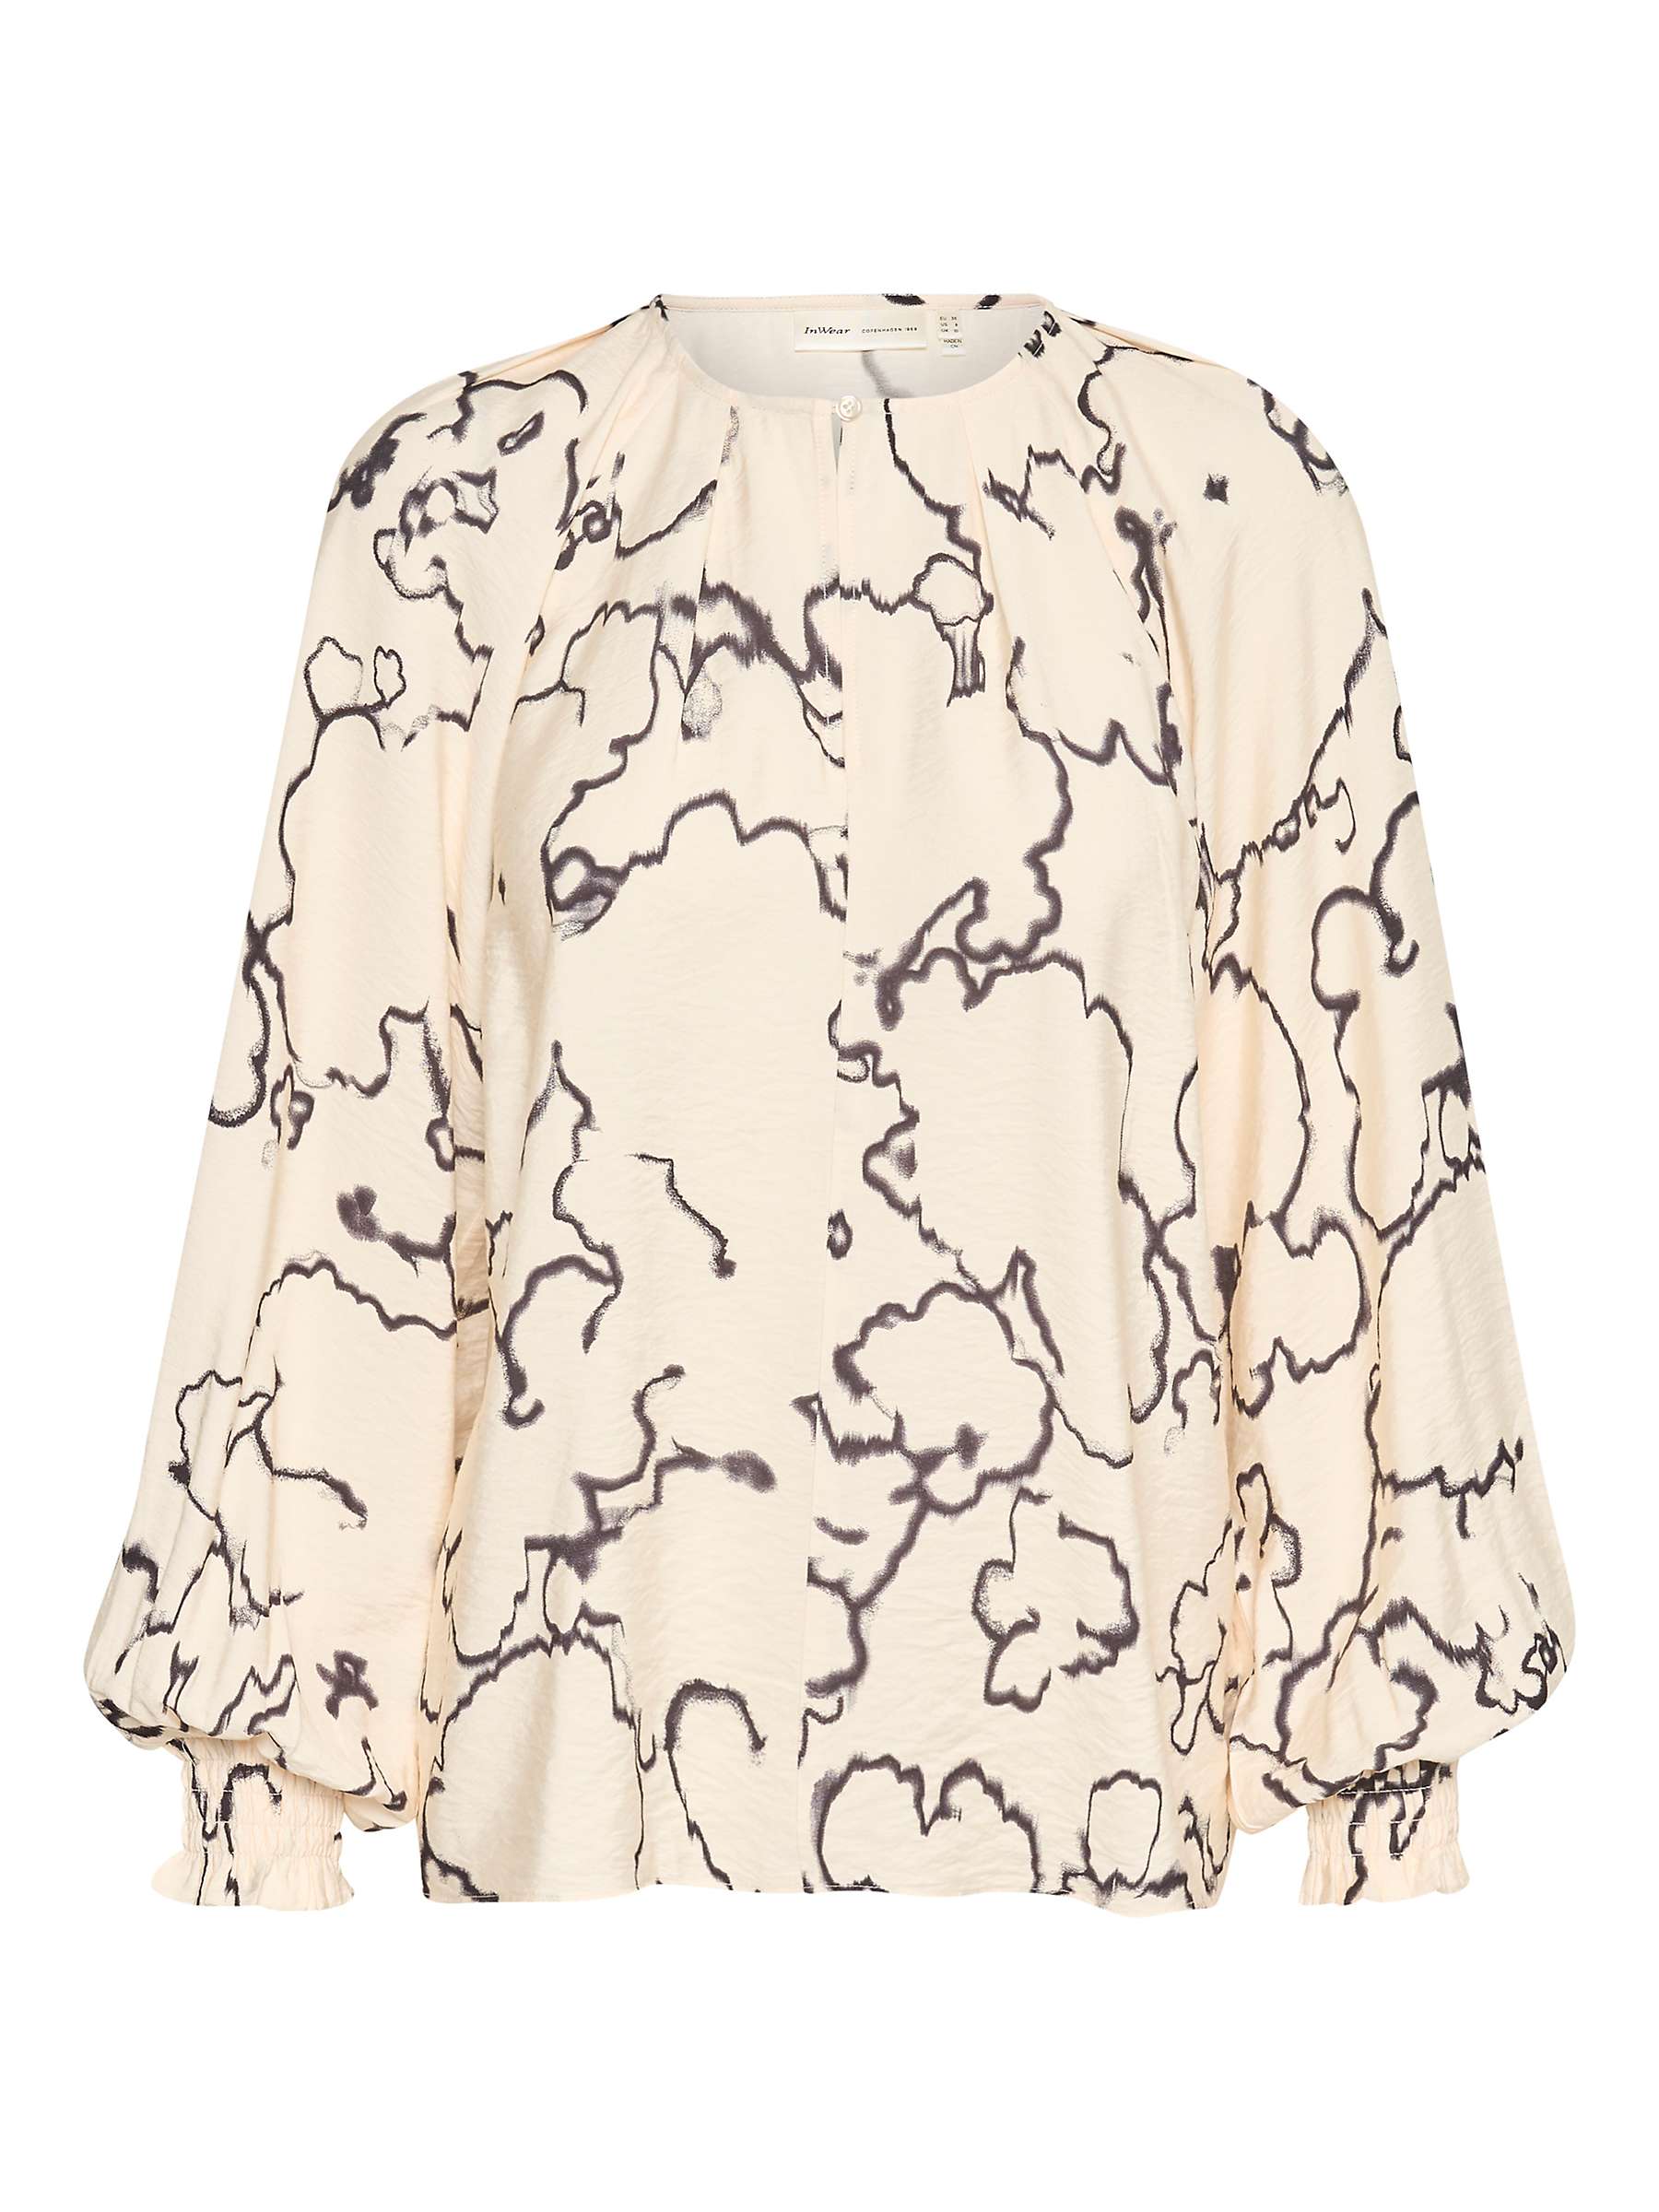 Buy InWear Cait Abstract Long Sleeve Top, Vanilla Online at johnlewis.com